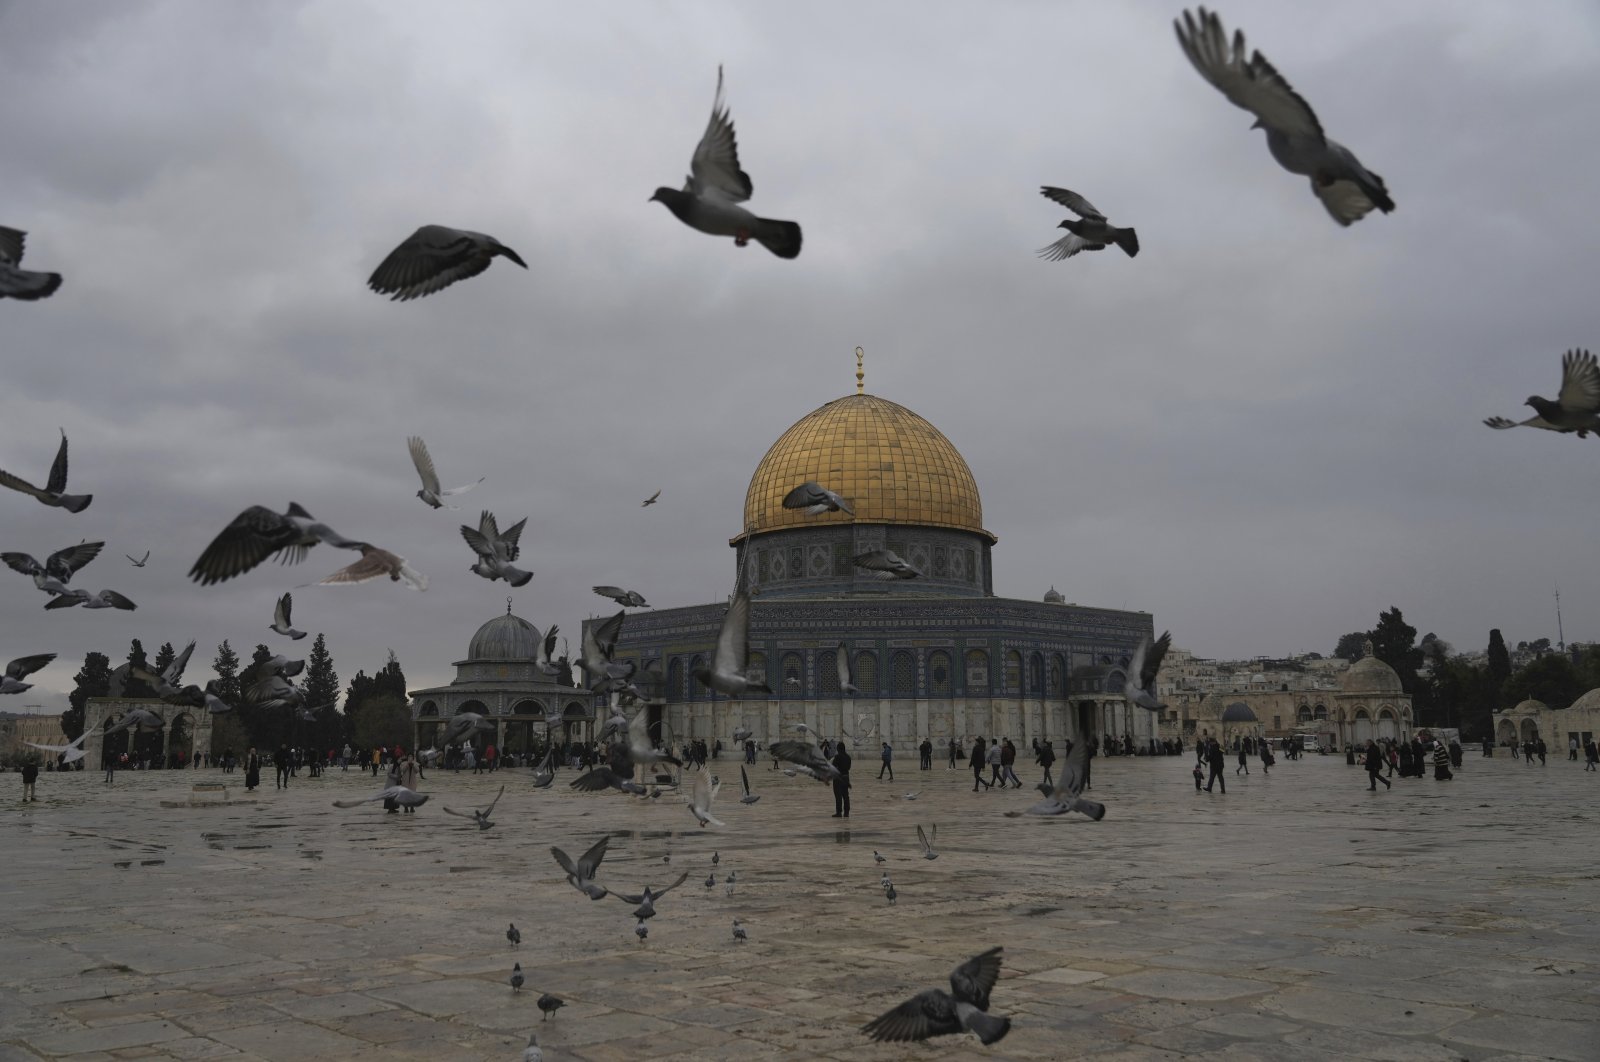 Birds fly near the Dome of the Rock Mosque in the Al-Aqsa Mosque compound in the Old City as worshippers gather for Friday prayers on a cold, rainy day at the Al-Aqsa Mosque compound in the  Israeli-occupied Jerusalem, Palestine, Jan. 6, 2023. (AP Photo)